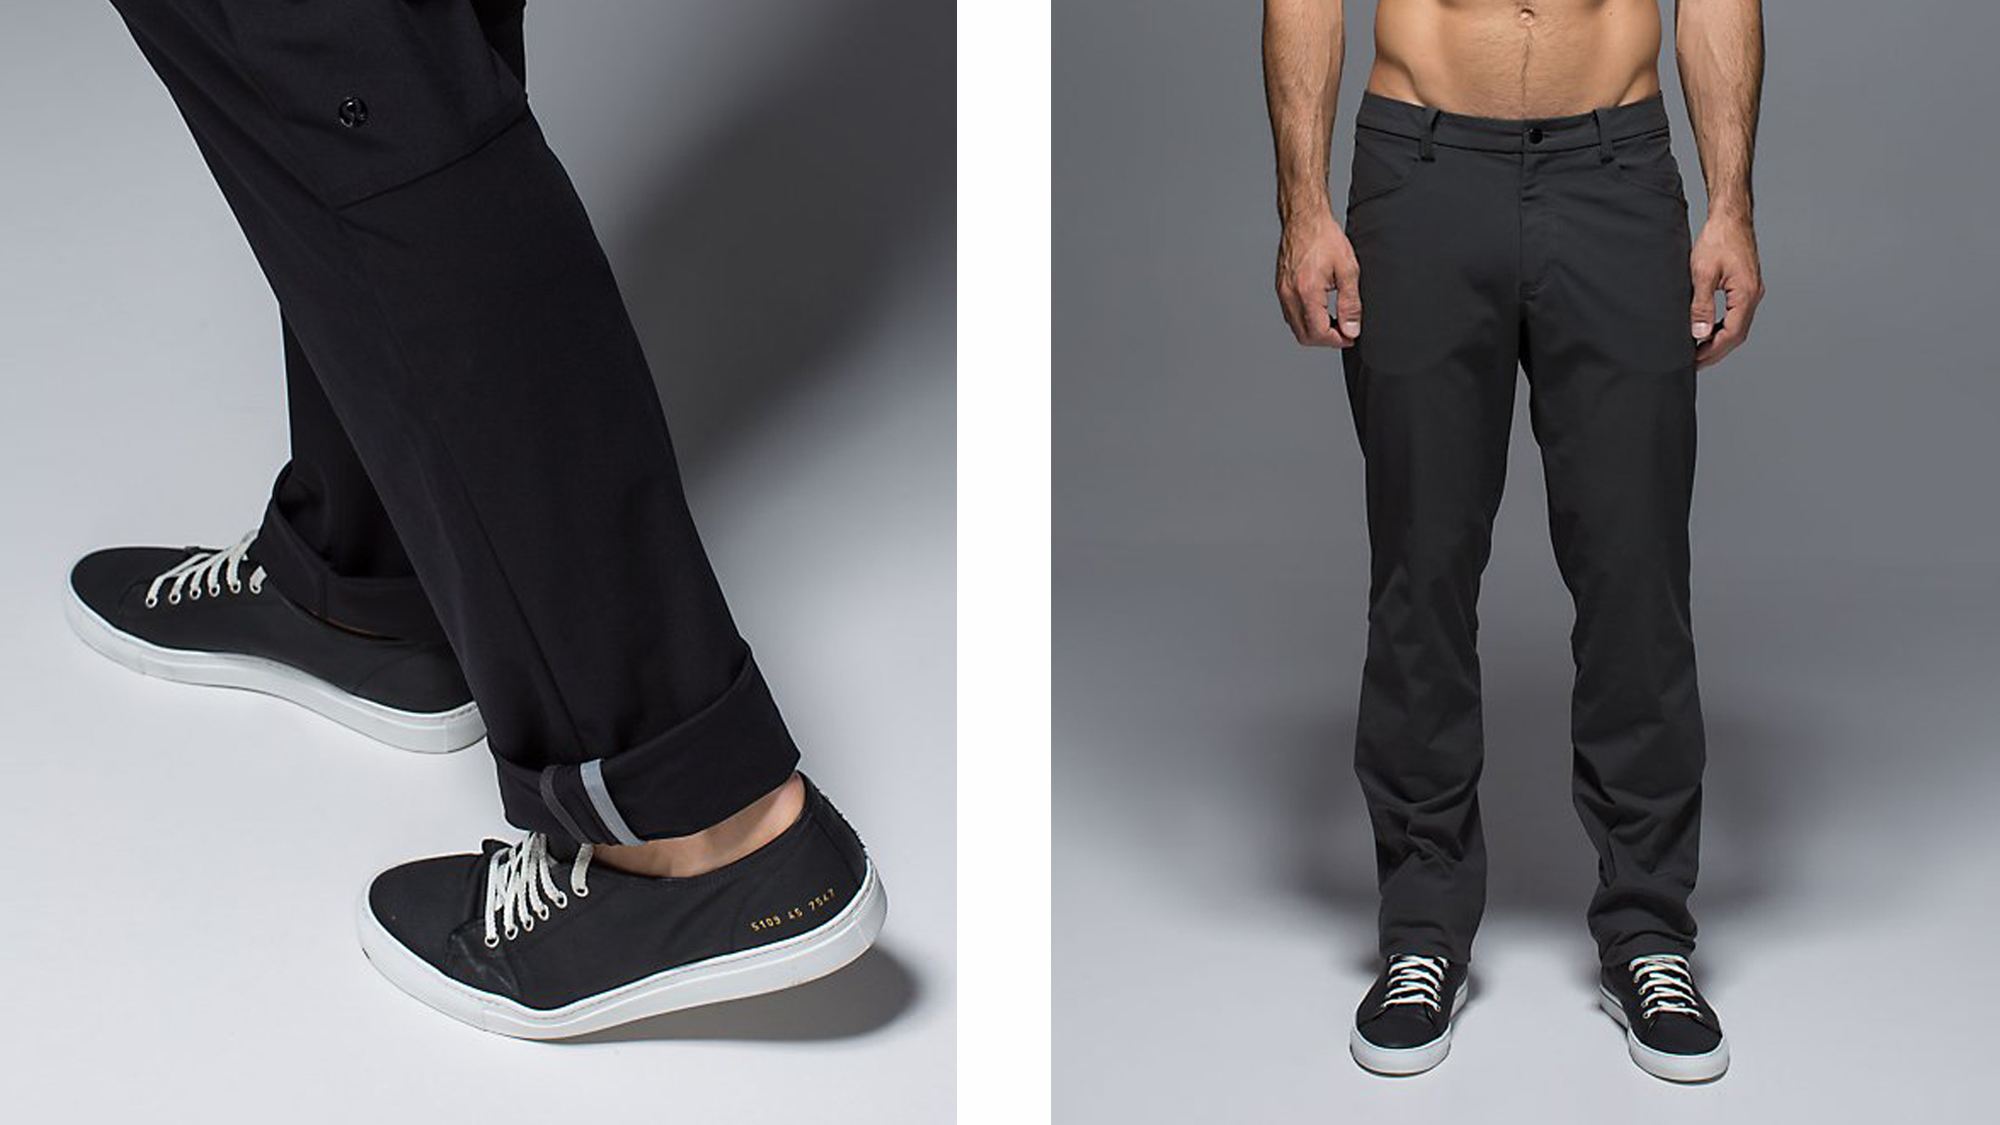 shoes to wear with lululemon pants